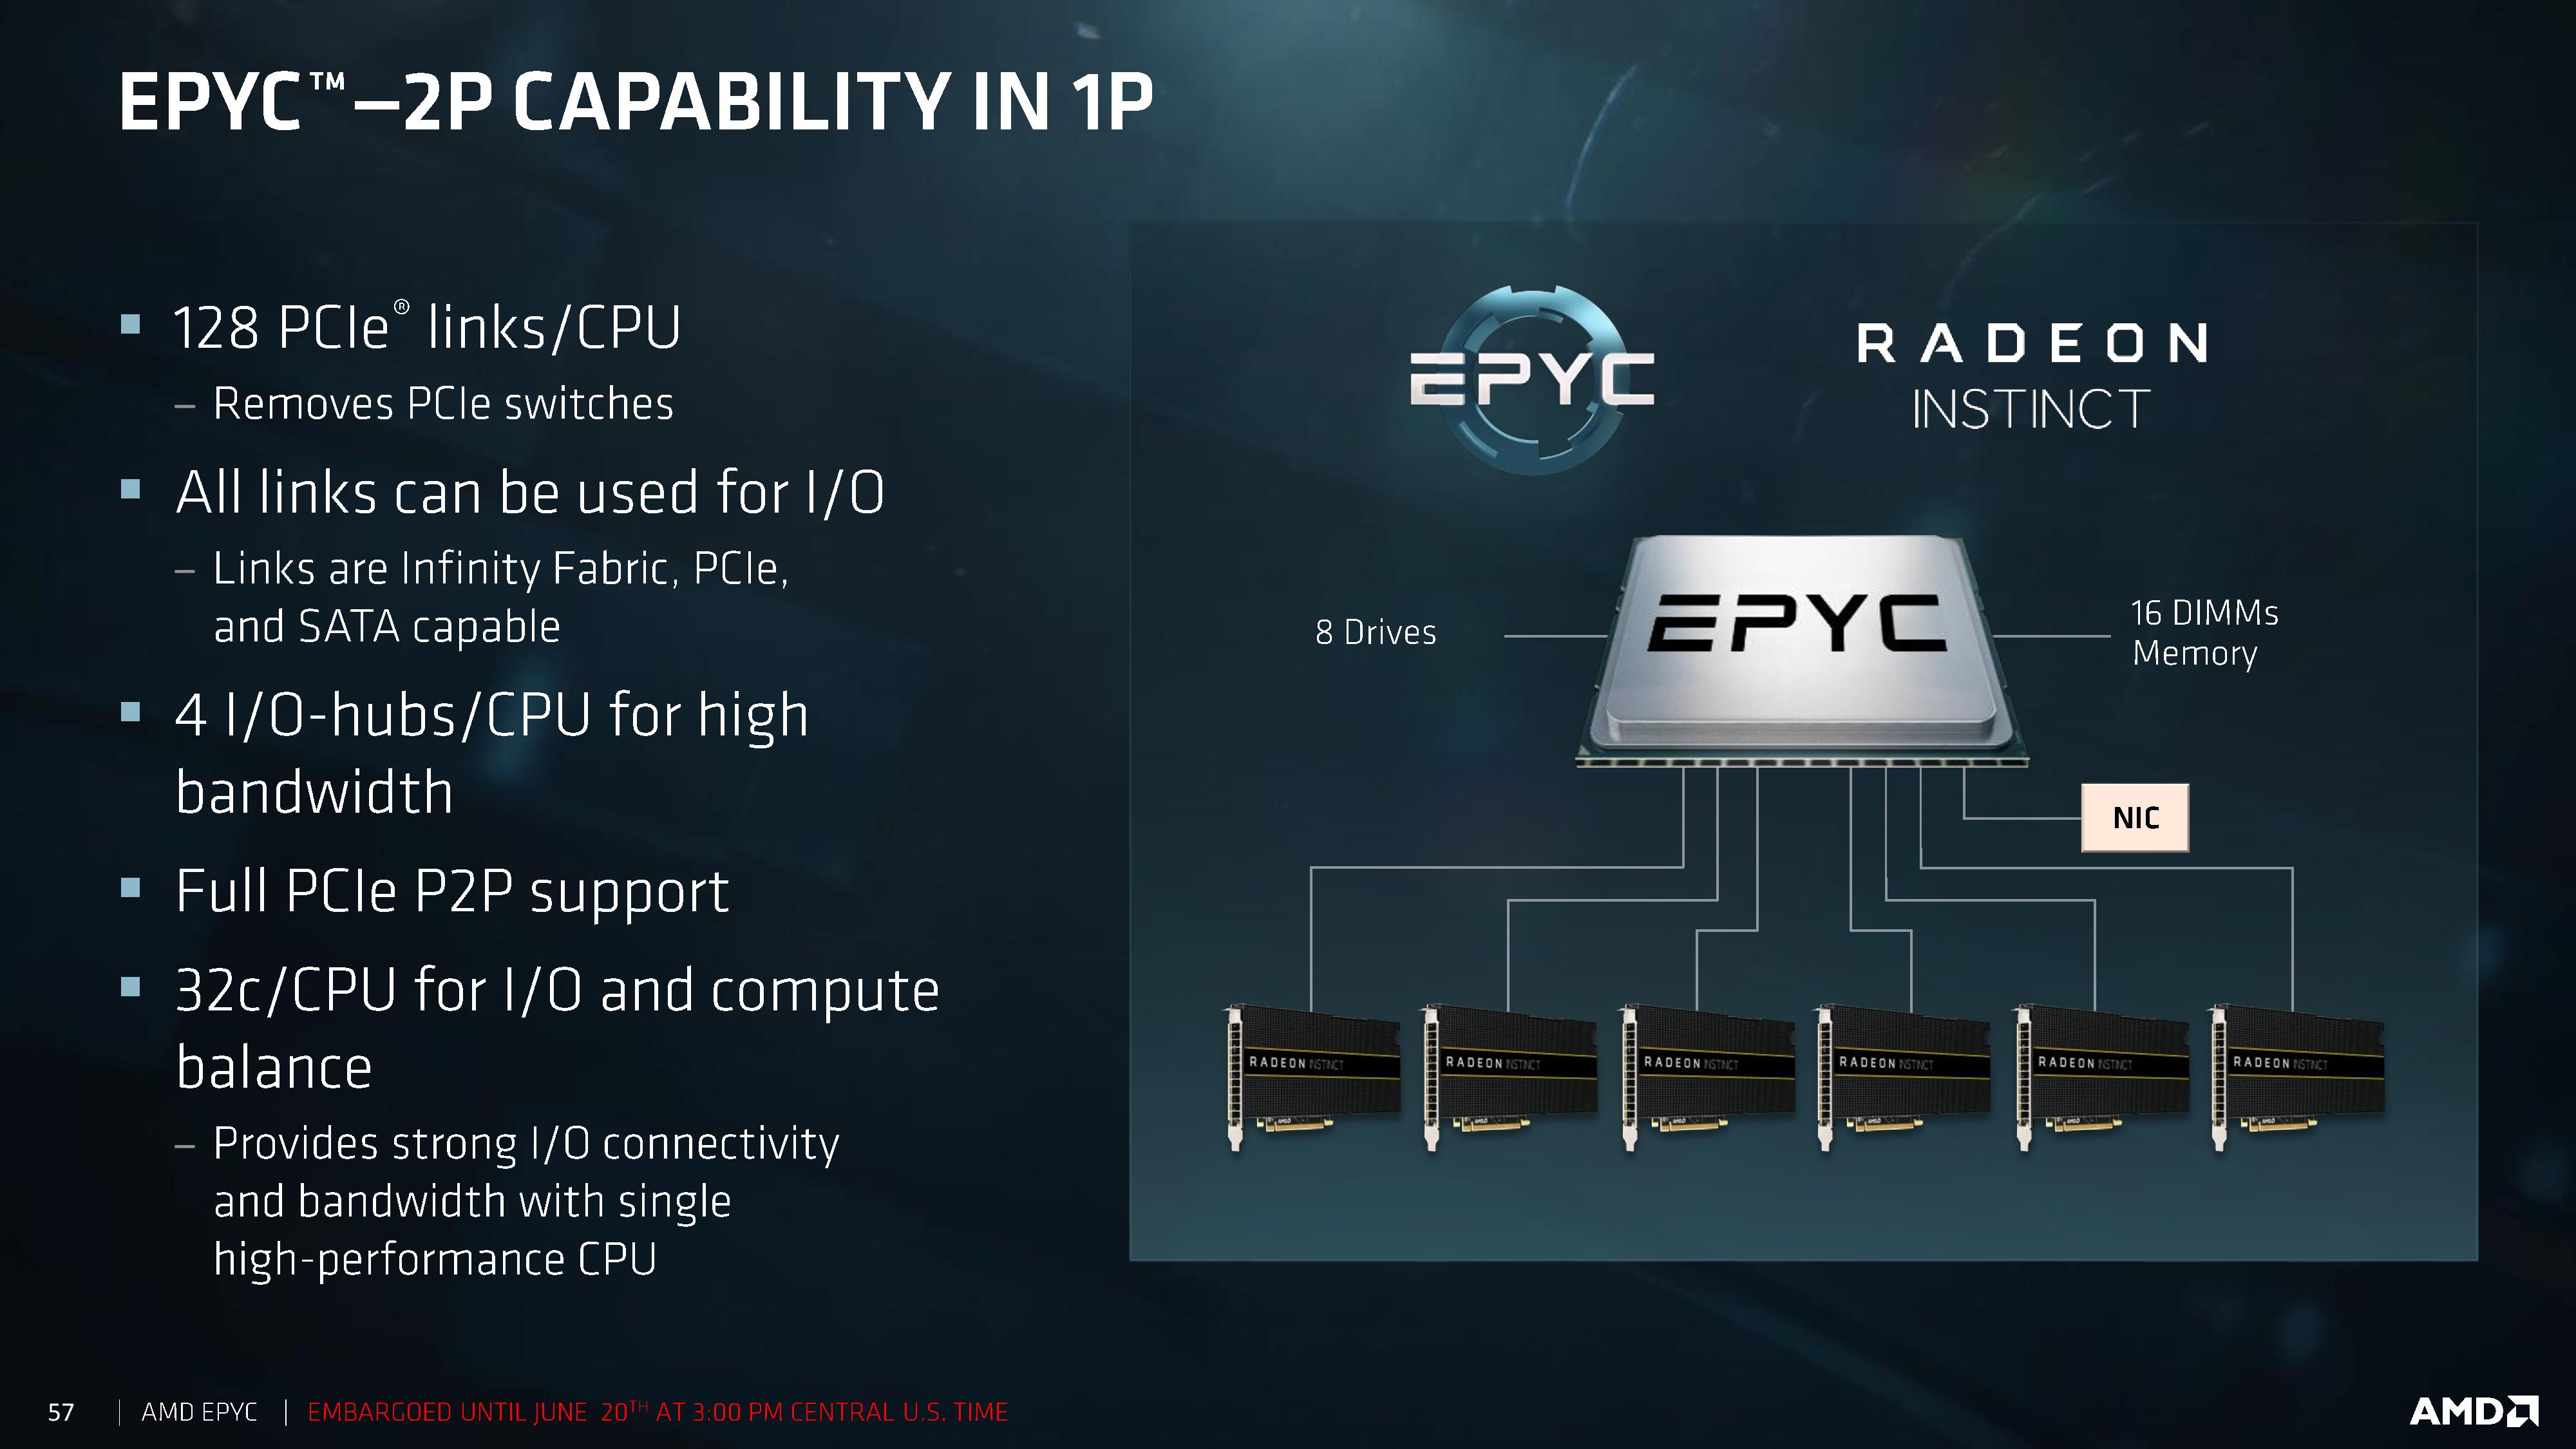 wimper Stiptheid Absoluut AMD's Future in Servers: New 7000-Series CPUs Launched and EPYC Analysis